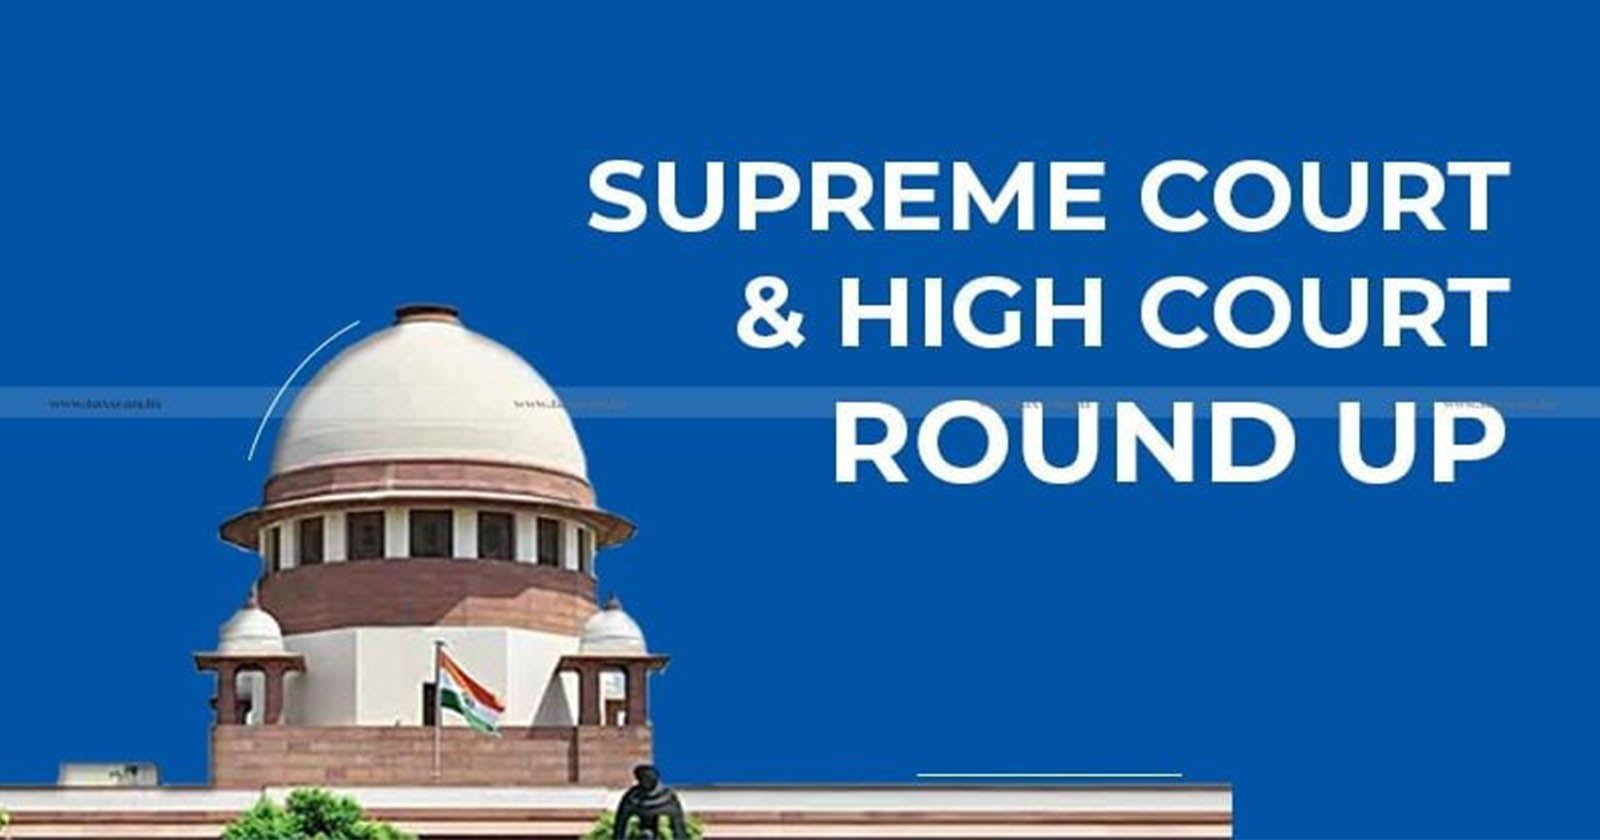 Weekly round up - Supreme court and high court weekly round up - High court weekly round up - Supreme court weekly round up - Supreme Court Weekly news - High court weekly news - TAXSCAN